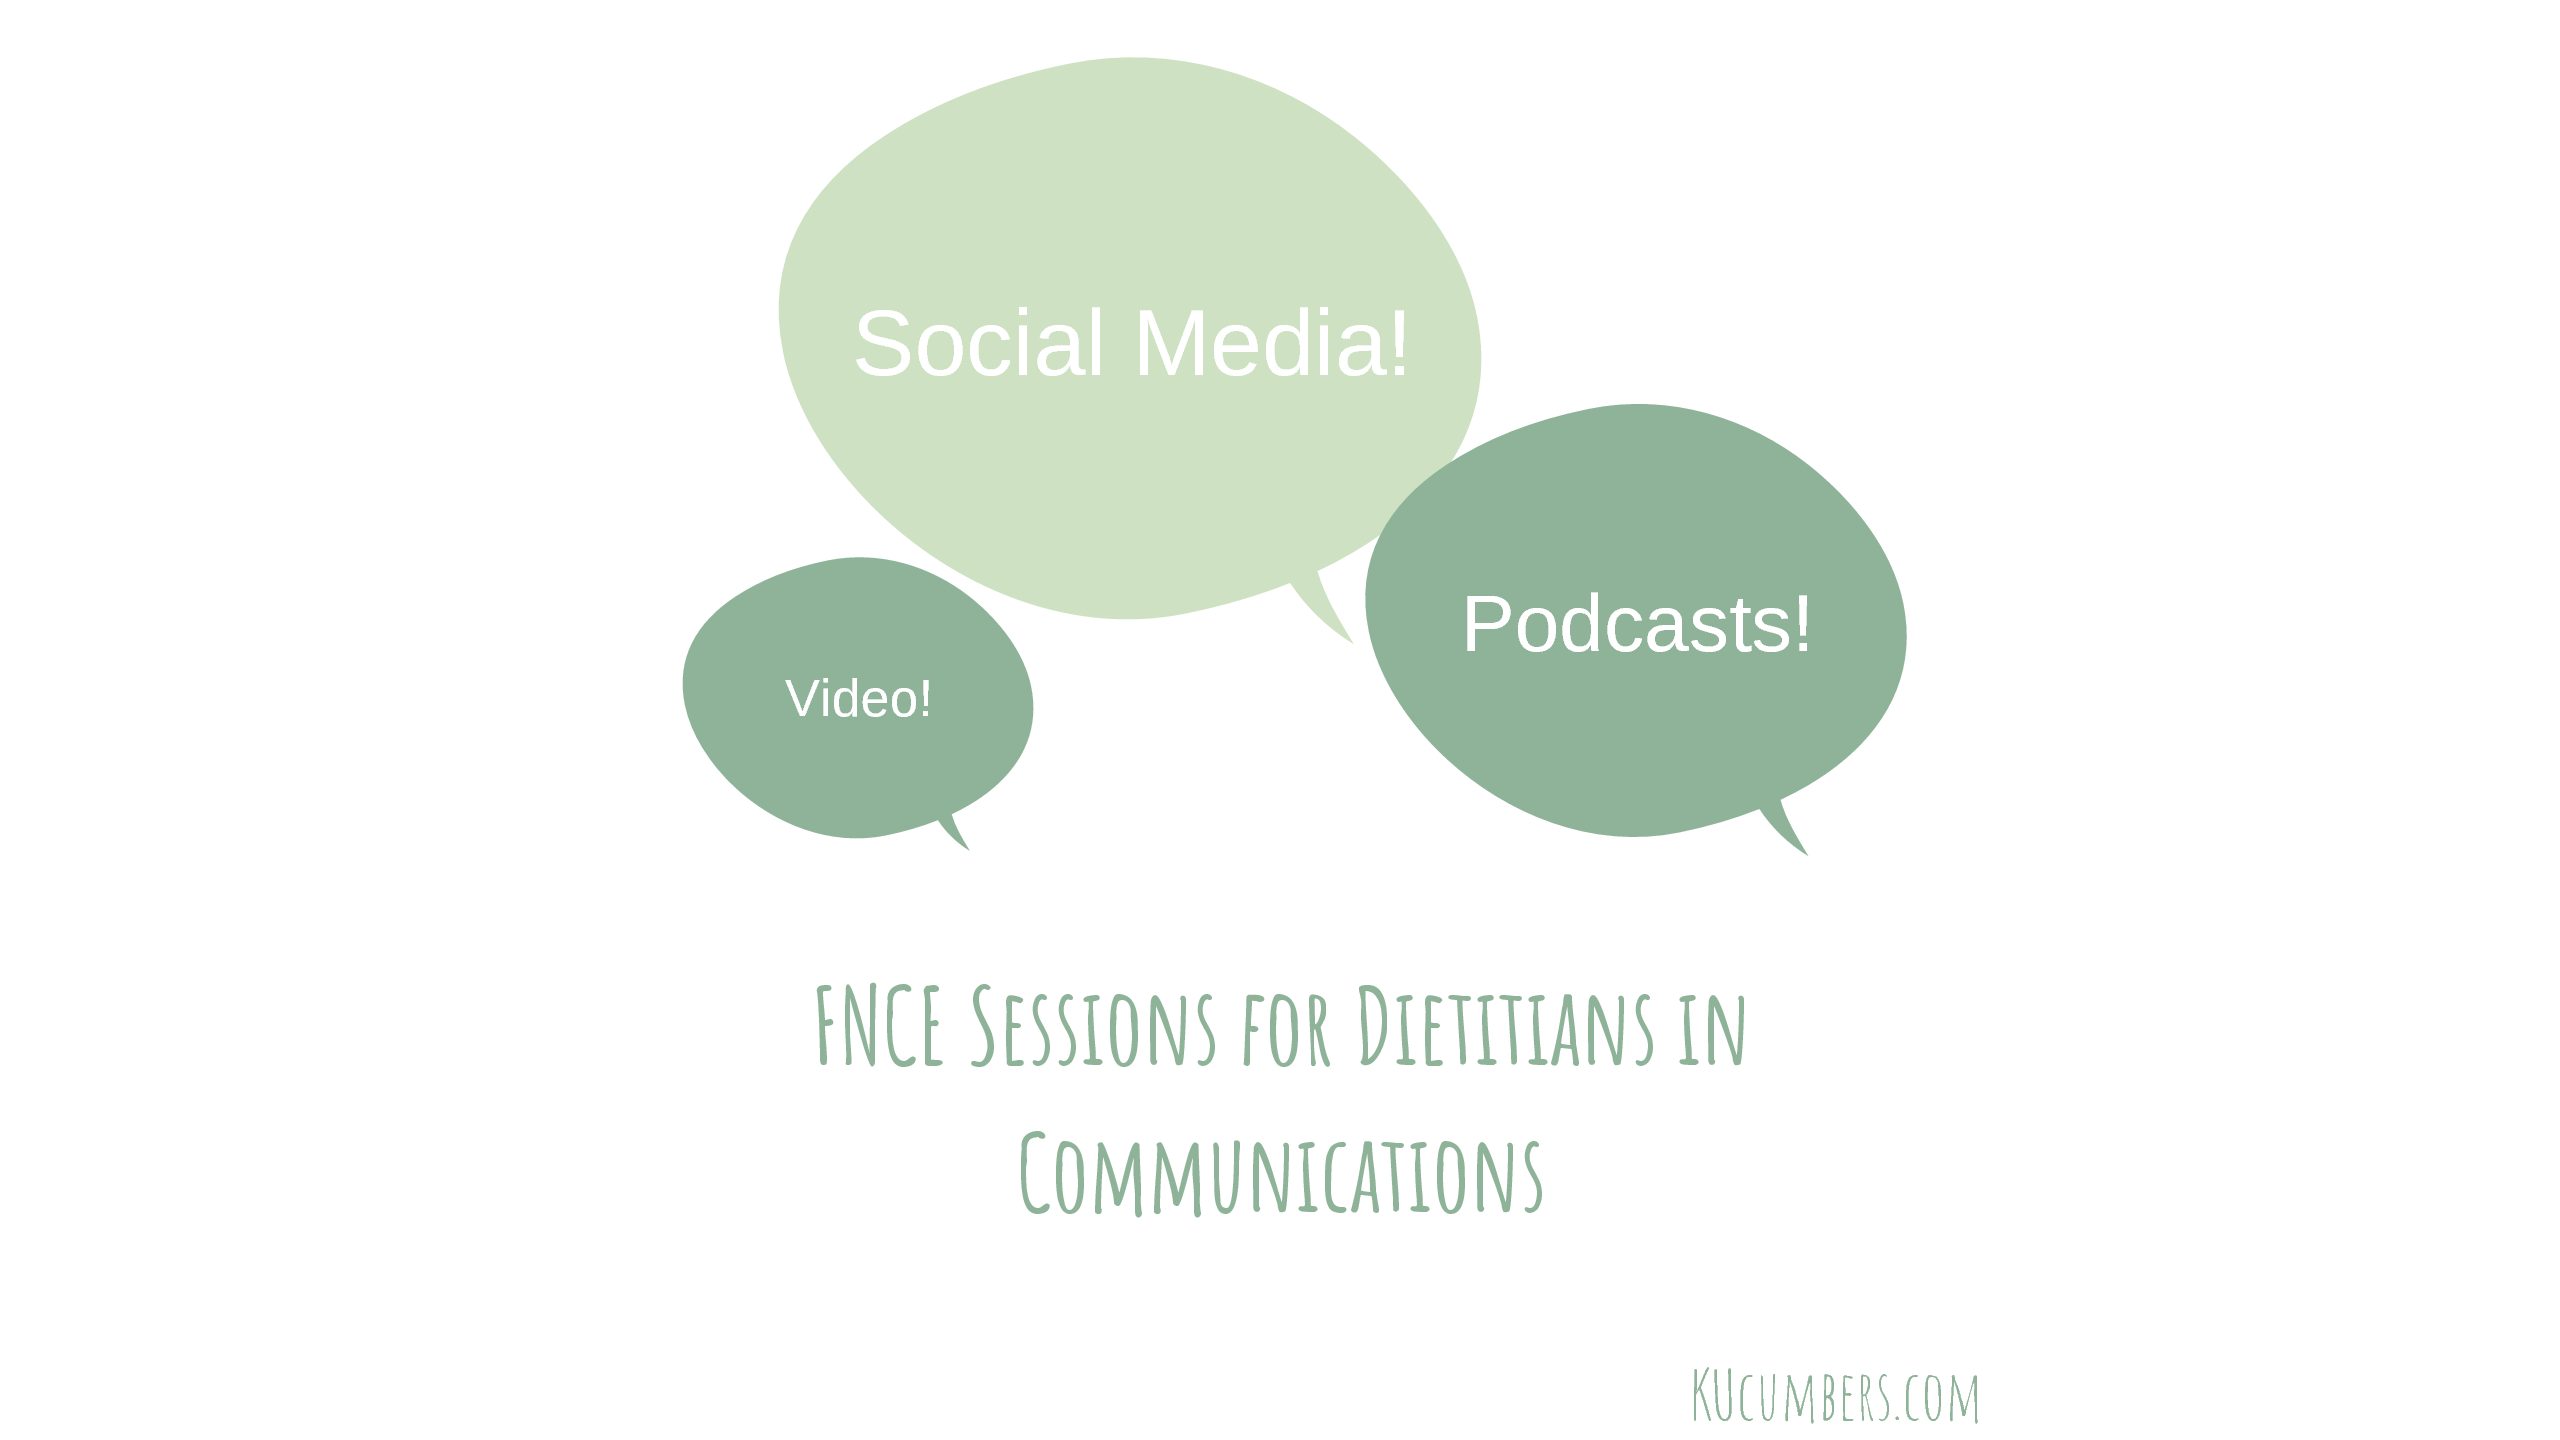 FNCE® Sessions for Dietitians in Communications